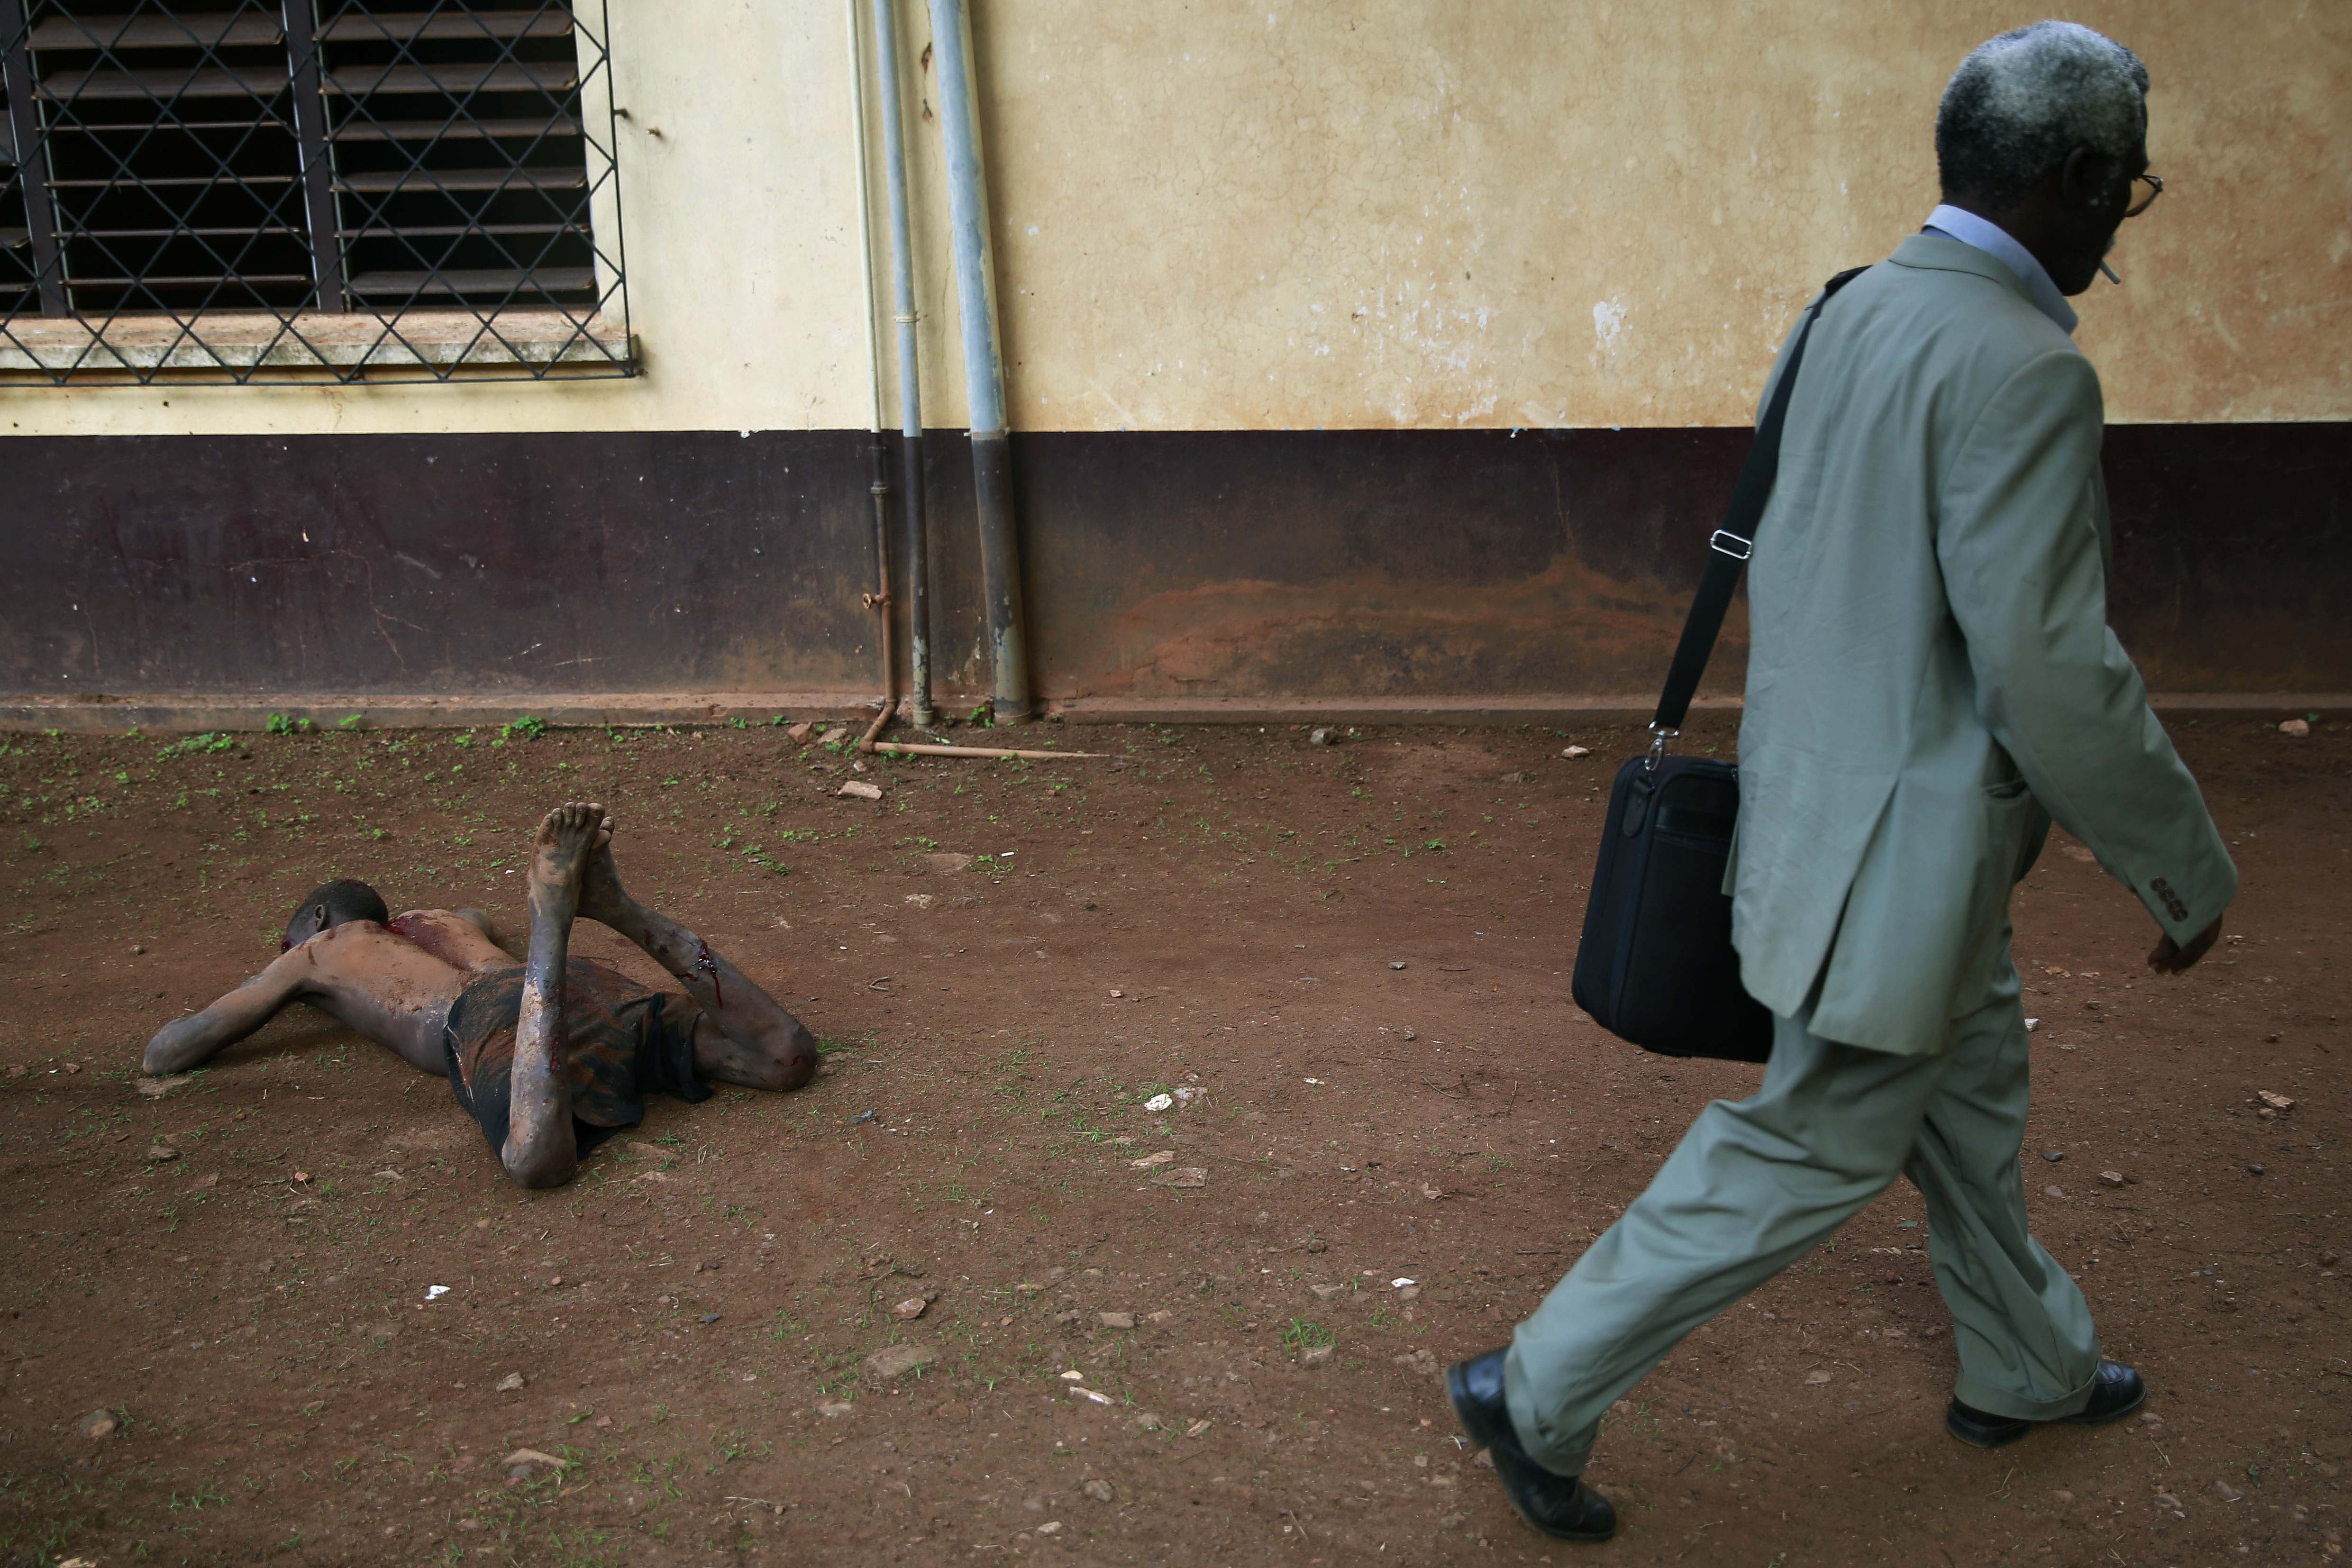 Apr. 18, 2014. A man walks by a man accused of being a thief by civil servants at the Work Inspection office, as he lays in pain after being attacked by a man with a machete and sticks,  in plain view of others, in Bangui, Central African Republic.